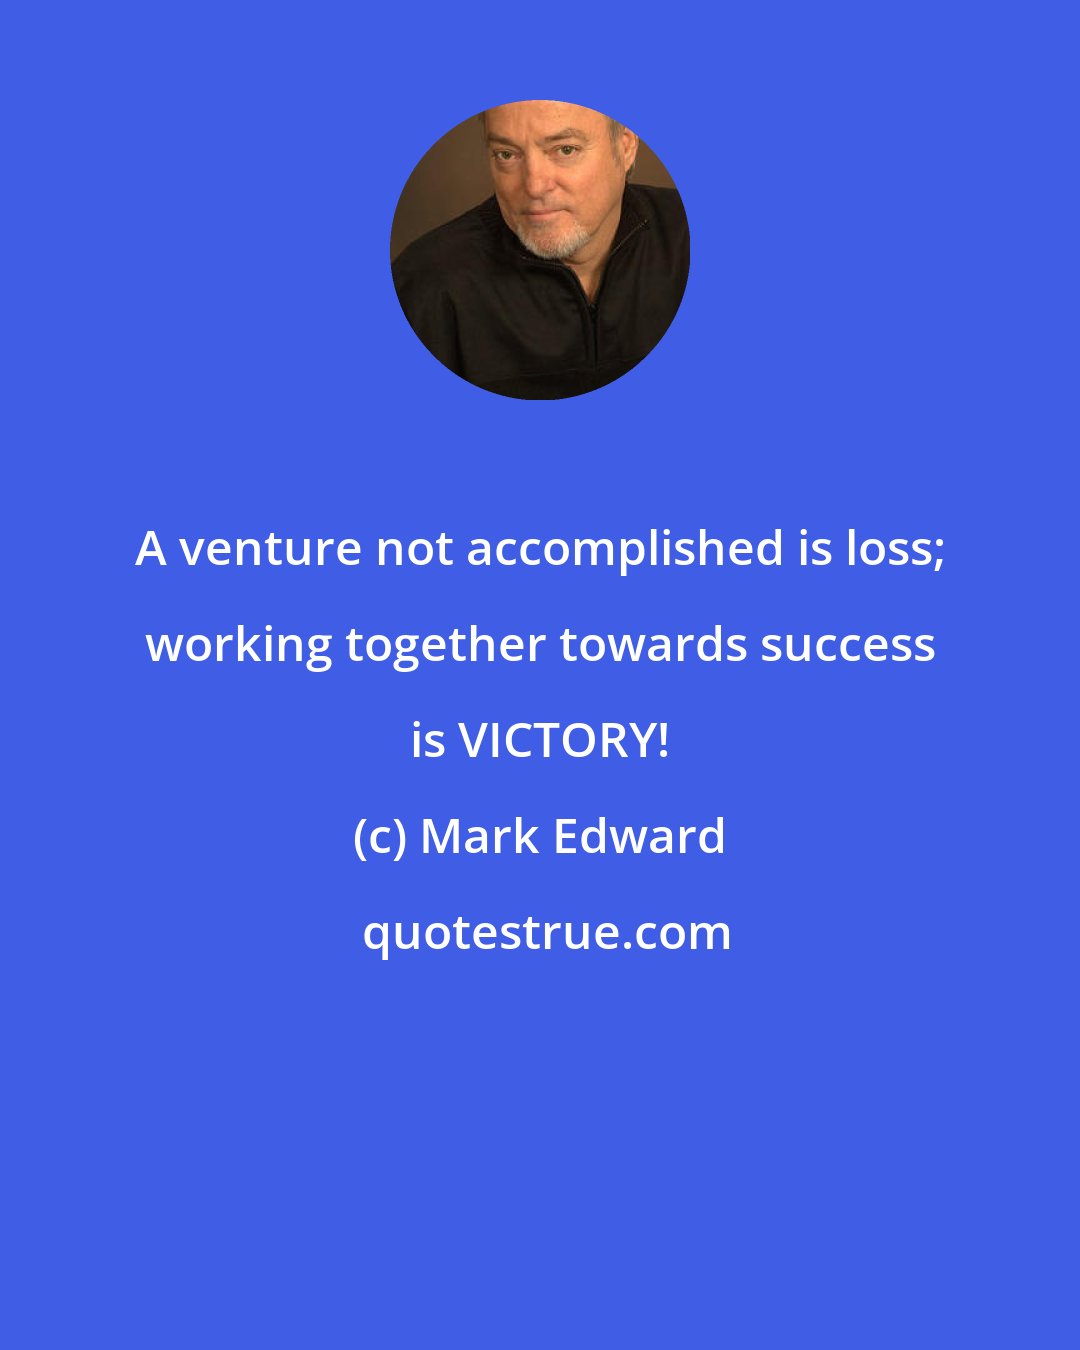 Mark Edward: A venture not accomplished is loss; working together towards success is VICTORY!